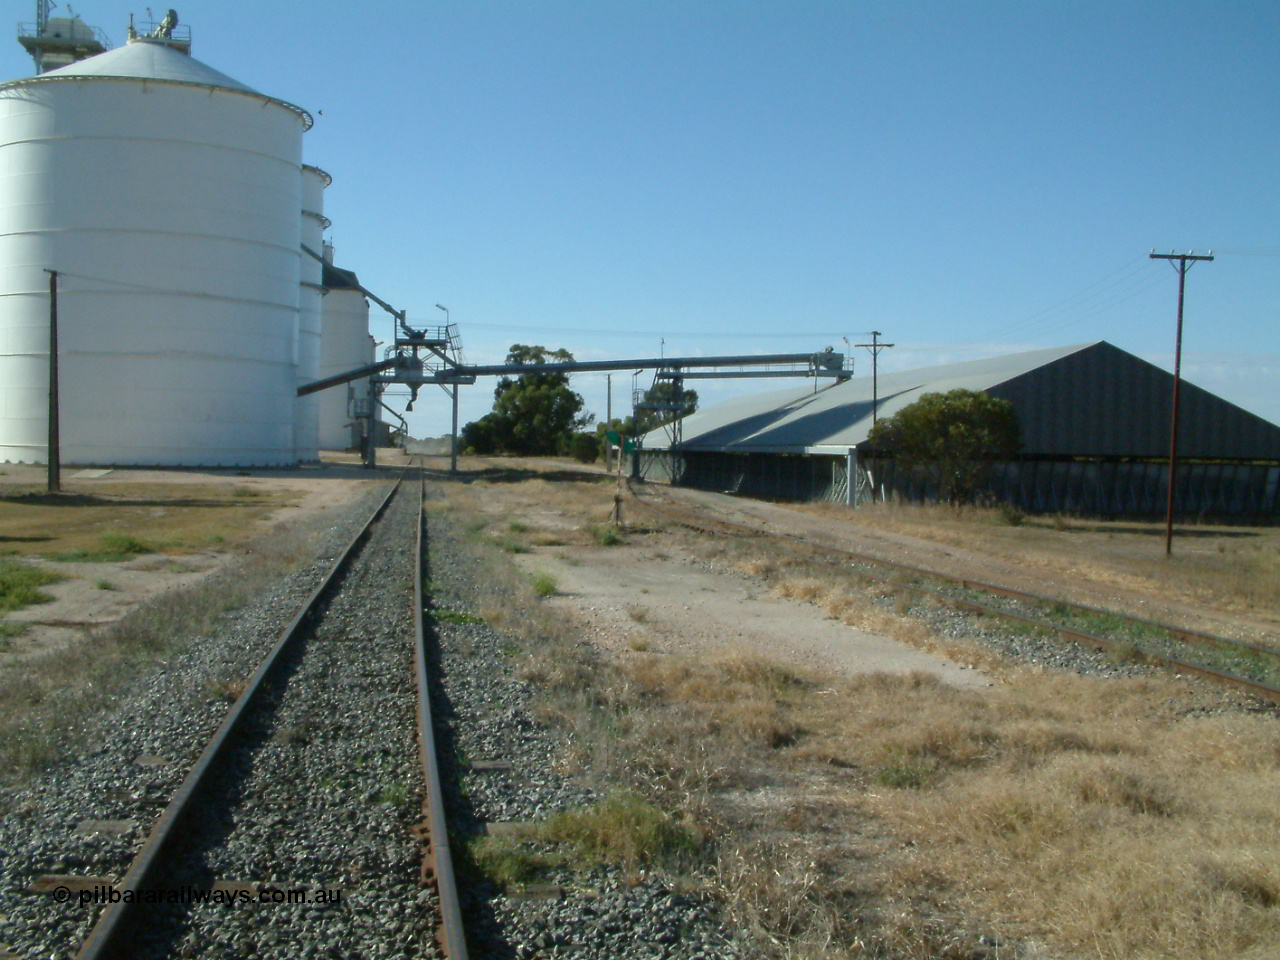 030405 155752
Lock, yard overview looking north along the grain siding, mainline to the right, Ascom style silo complex Block 5 with outflow spout visible on the left, point lever and indicator for horizontal grain shed siding in the middle of frame, and transfer auger across tracks. 5th April 2003.
